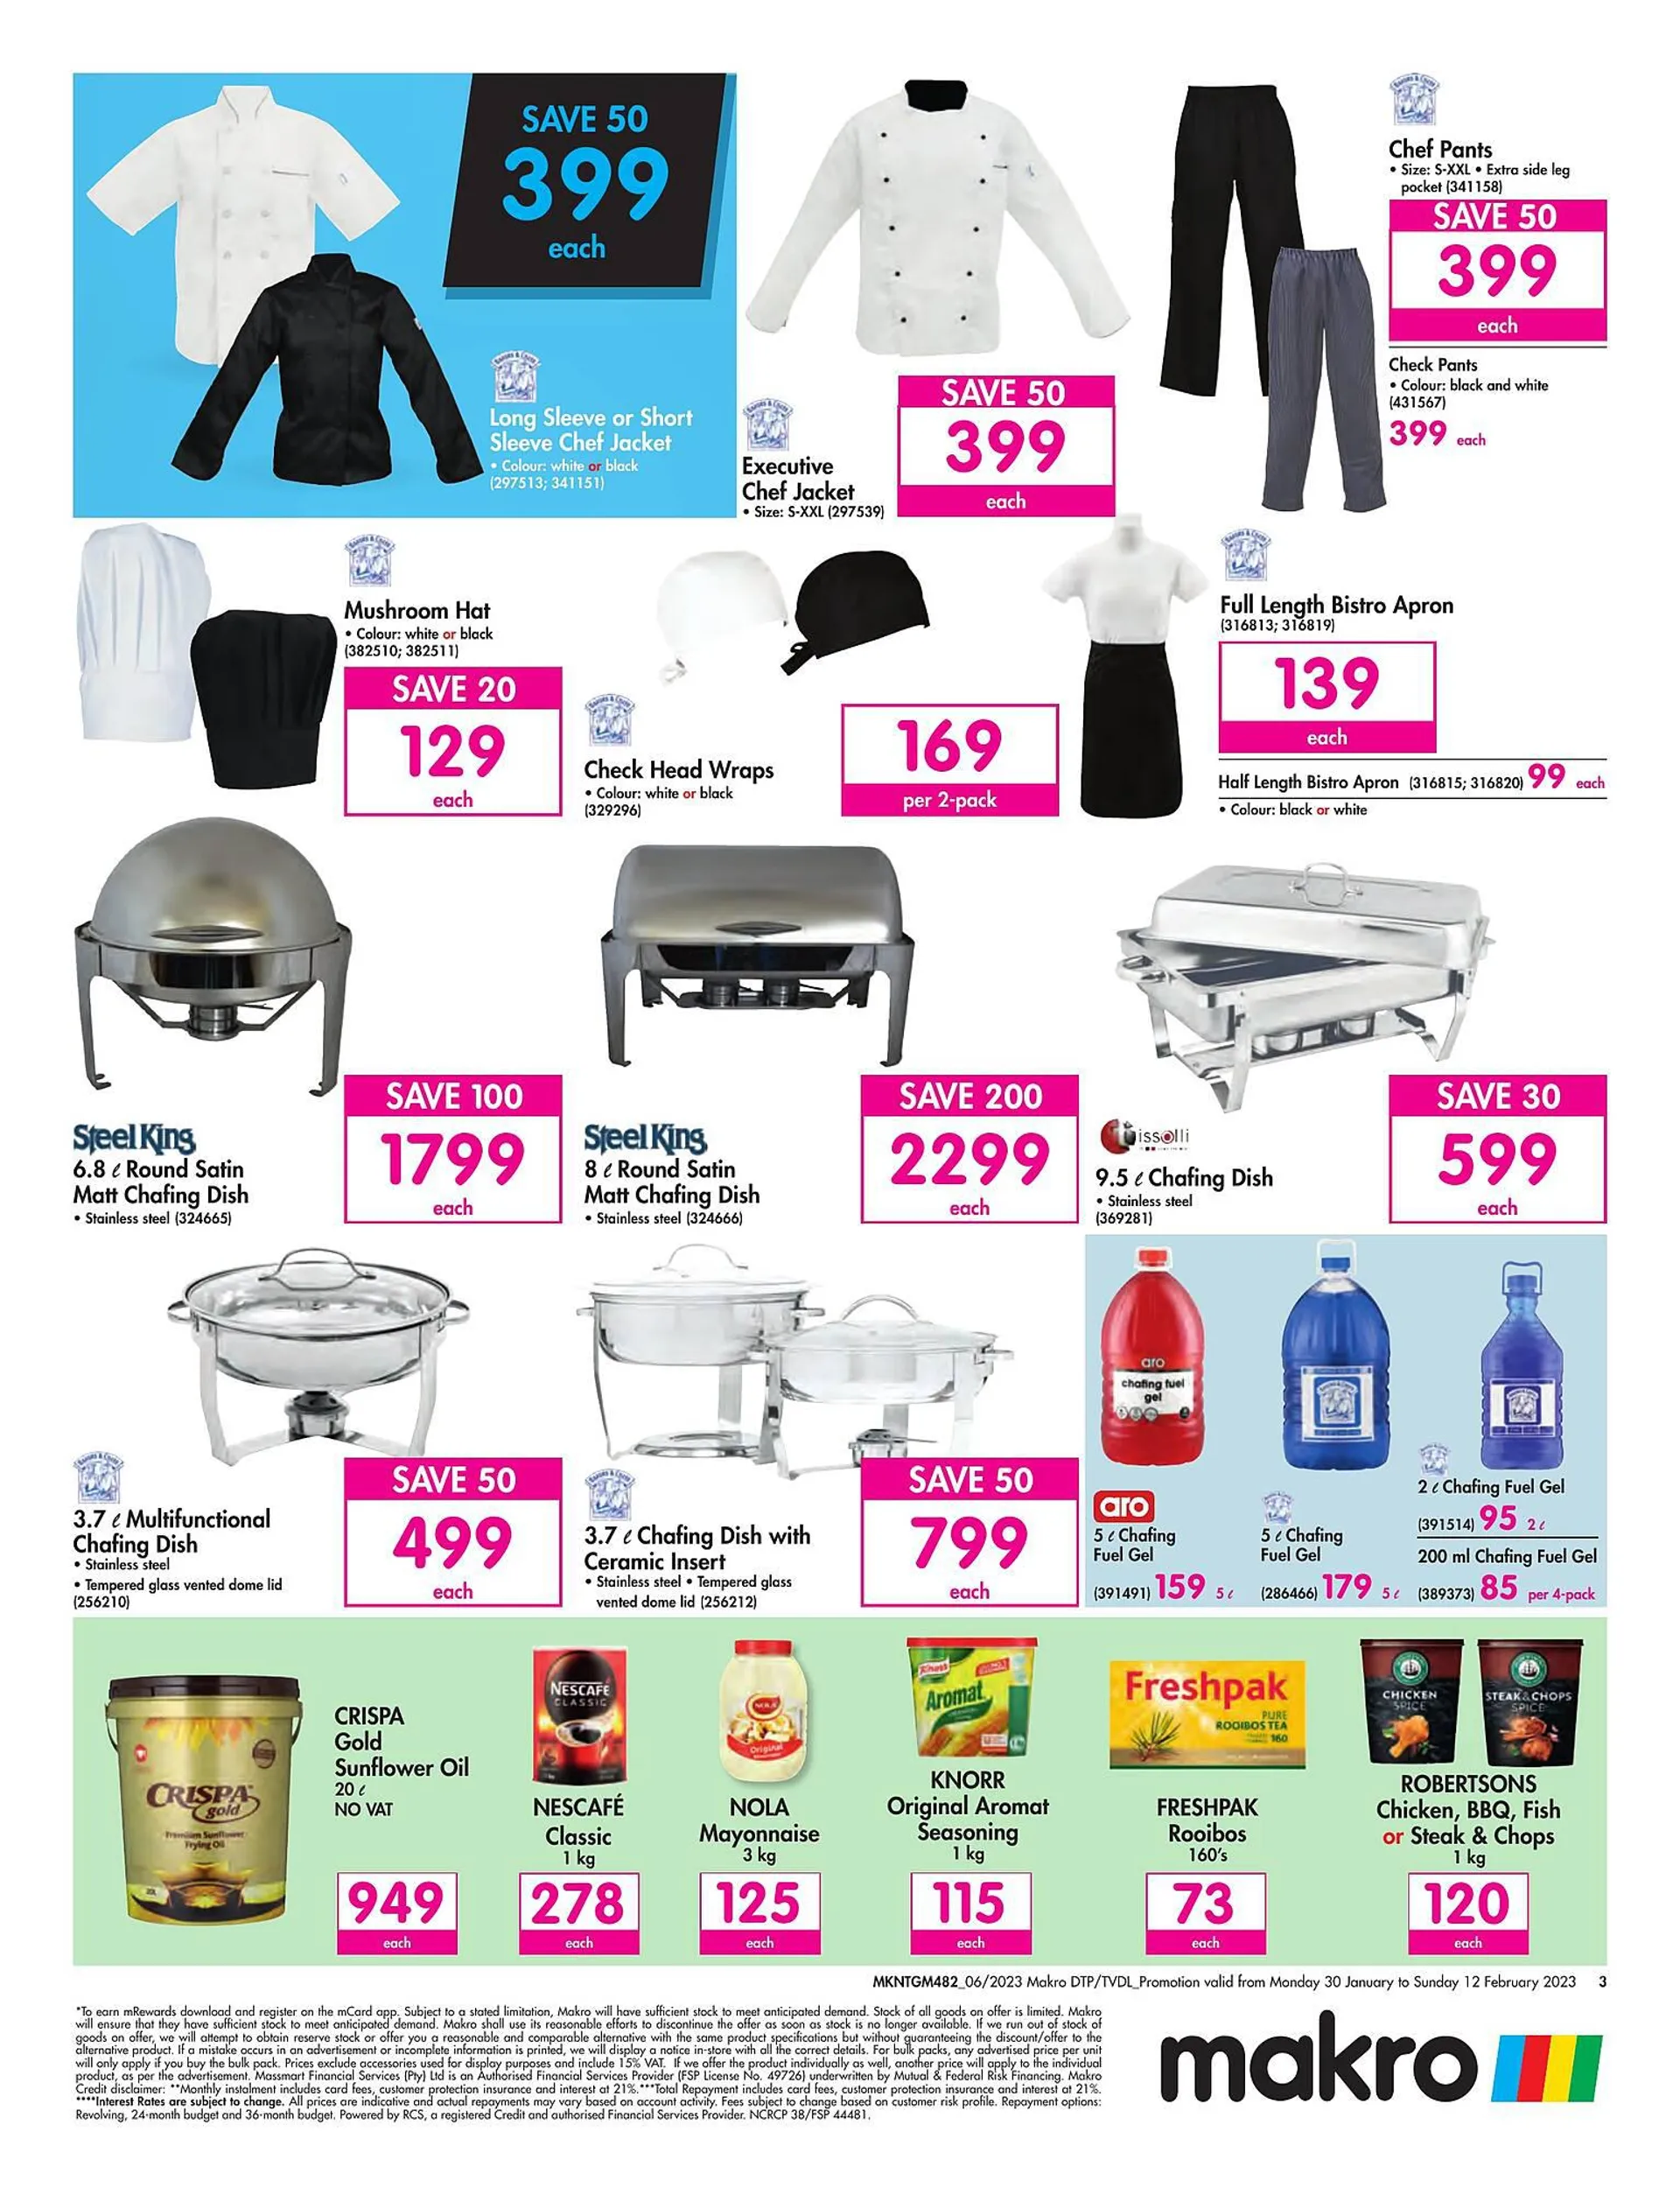 Makro catalogue - Catering - 3